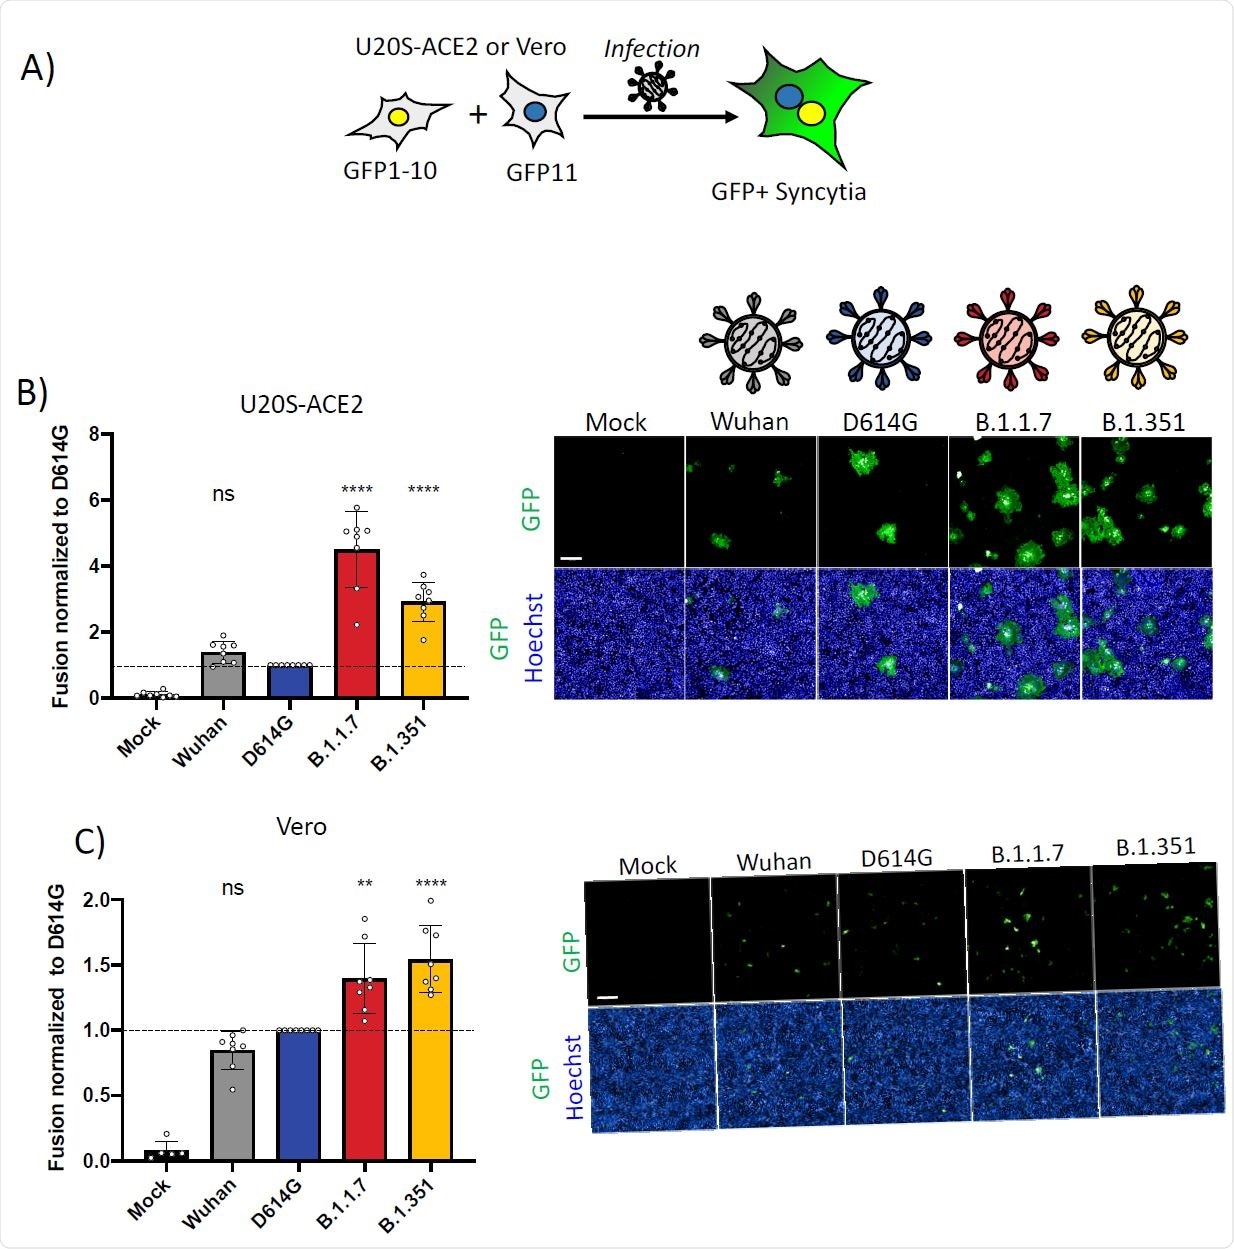 SARS-CoV-2 variant infection increases formation of syncytia in U2OS-ACE2 and Vero GFP-split cells. (A) U2OS-ACE2 or Vero cells expressing either GFP 1-10 or GFP 11 (1:1 ratio) were infected 24h after plating and imaged 20h (U2OS-ACE2) or 48h (Vero) post-infection. (B) Left Panel: Fusion was quantified by GFP area/ number of nuclei and normalized to D614G for U2OS-ACE2 20h post infection at MOI 0.001. Right Panel: Representative images of U2OS-ACE2 20h post infection, GFP-Split (Green) and Hoechst (Blue). Top and bottom are the same images with and without Hoechst channel. (C) Left Panel: Quantified fusion of Vero cells infected at MOI 0.01. Right Panel: Representative images of Vero cells 48h post infection, GFP-Split (Green) and Hoechst (Blue). Scale bars: 200 µm. Data are mean ± SD of 8 independent experiments. Statistical analysis: One-way ANOVA compared to D614G reference, ns: non-significant, *P < 0. 05, **P < 0.01, ***P < 0.001, ****P < 0.0001.